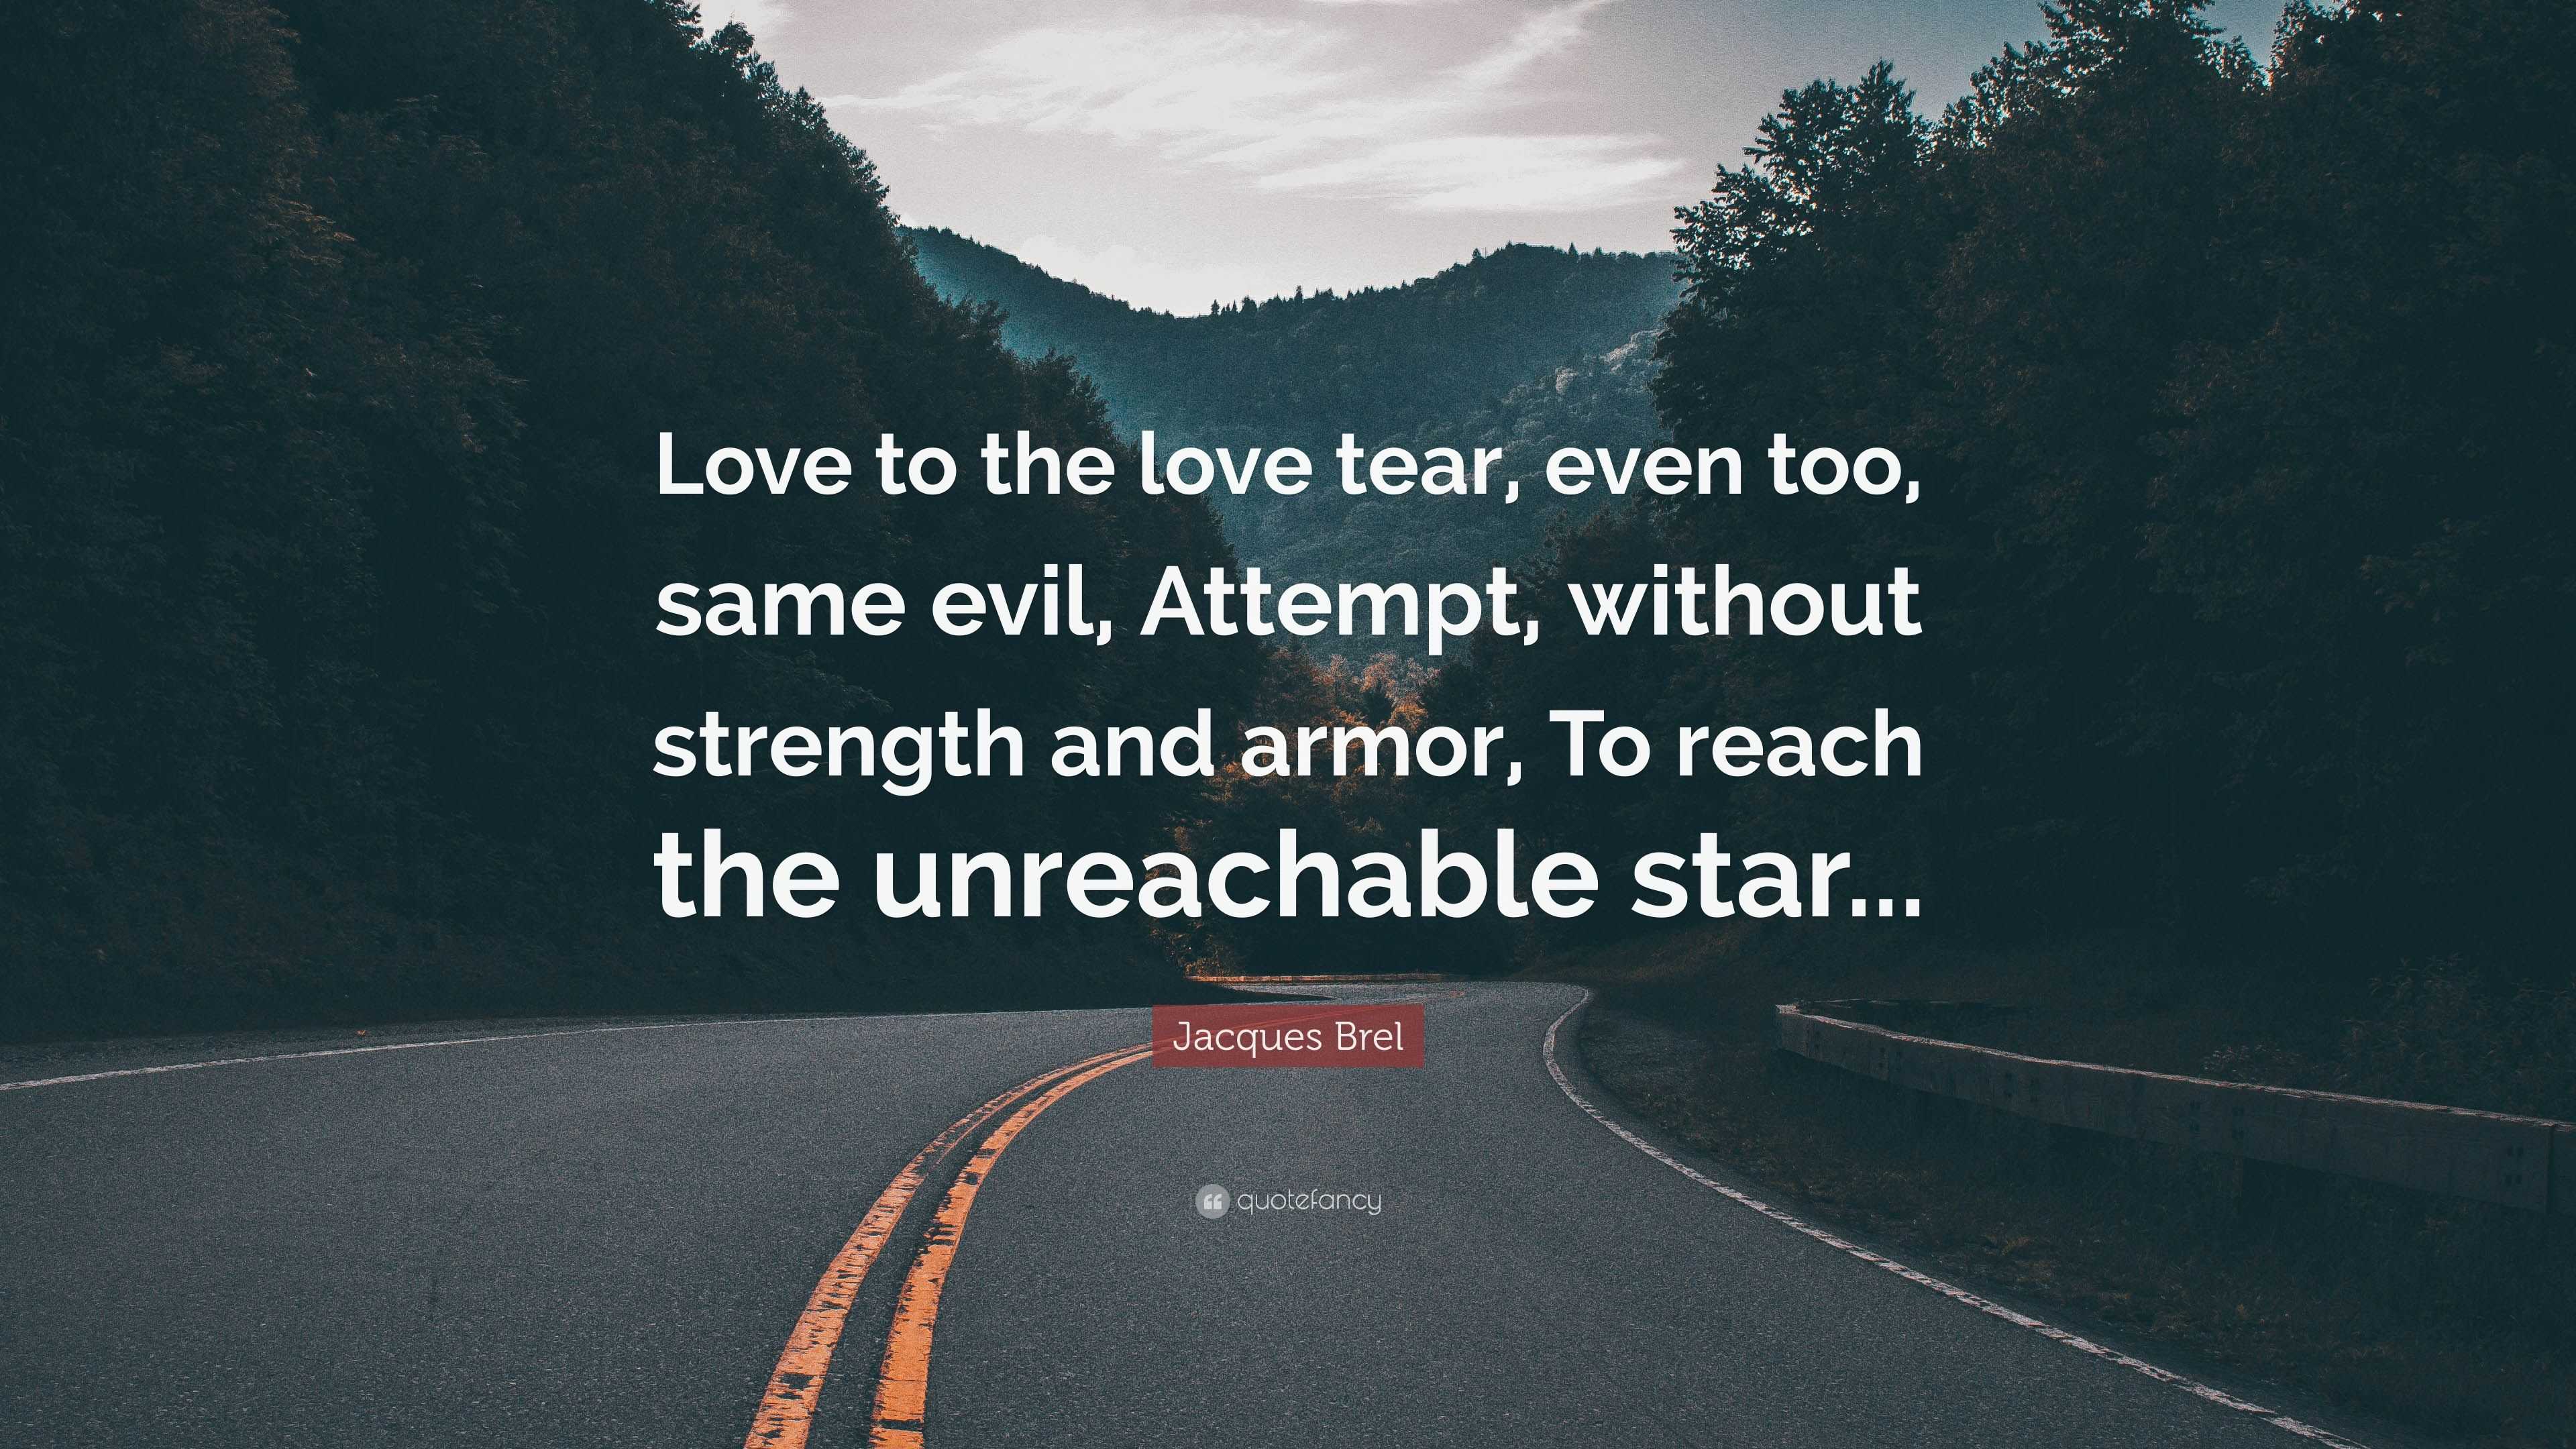 Jacques Brel Quote Love To The Love Tear Even Too Same Evil Attempt Without Strength And